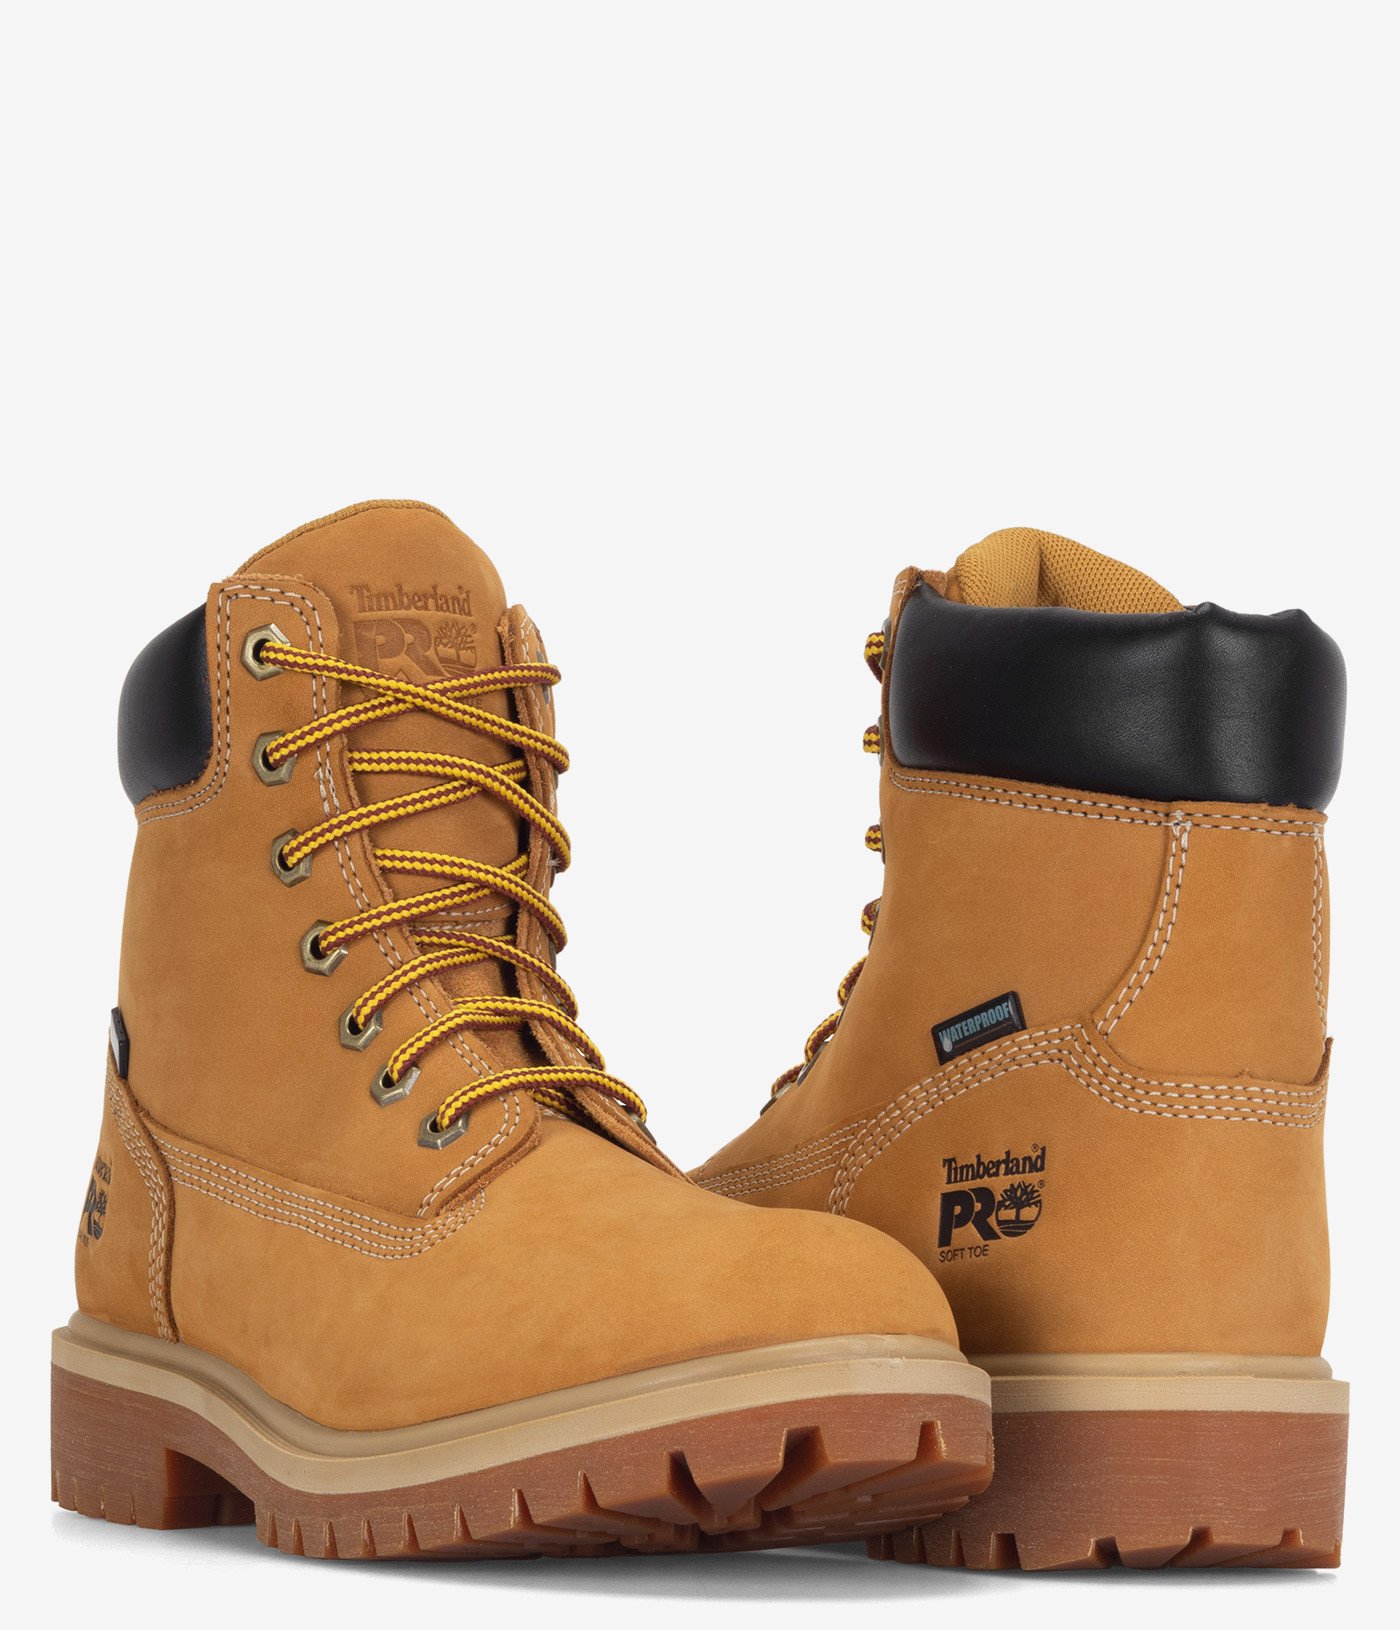 Timberland PRO Direct Attach 6" Waterproof Insulated Work Boot | Pair